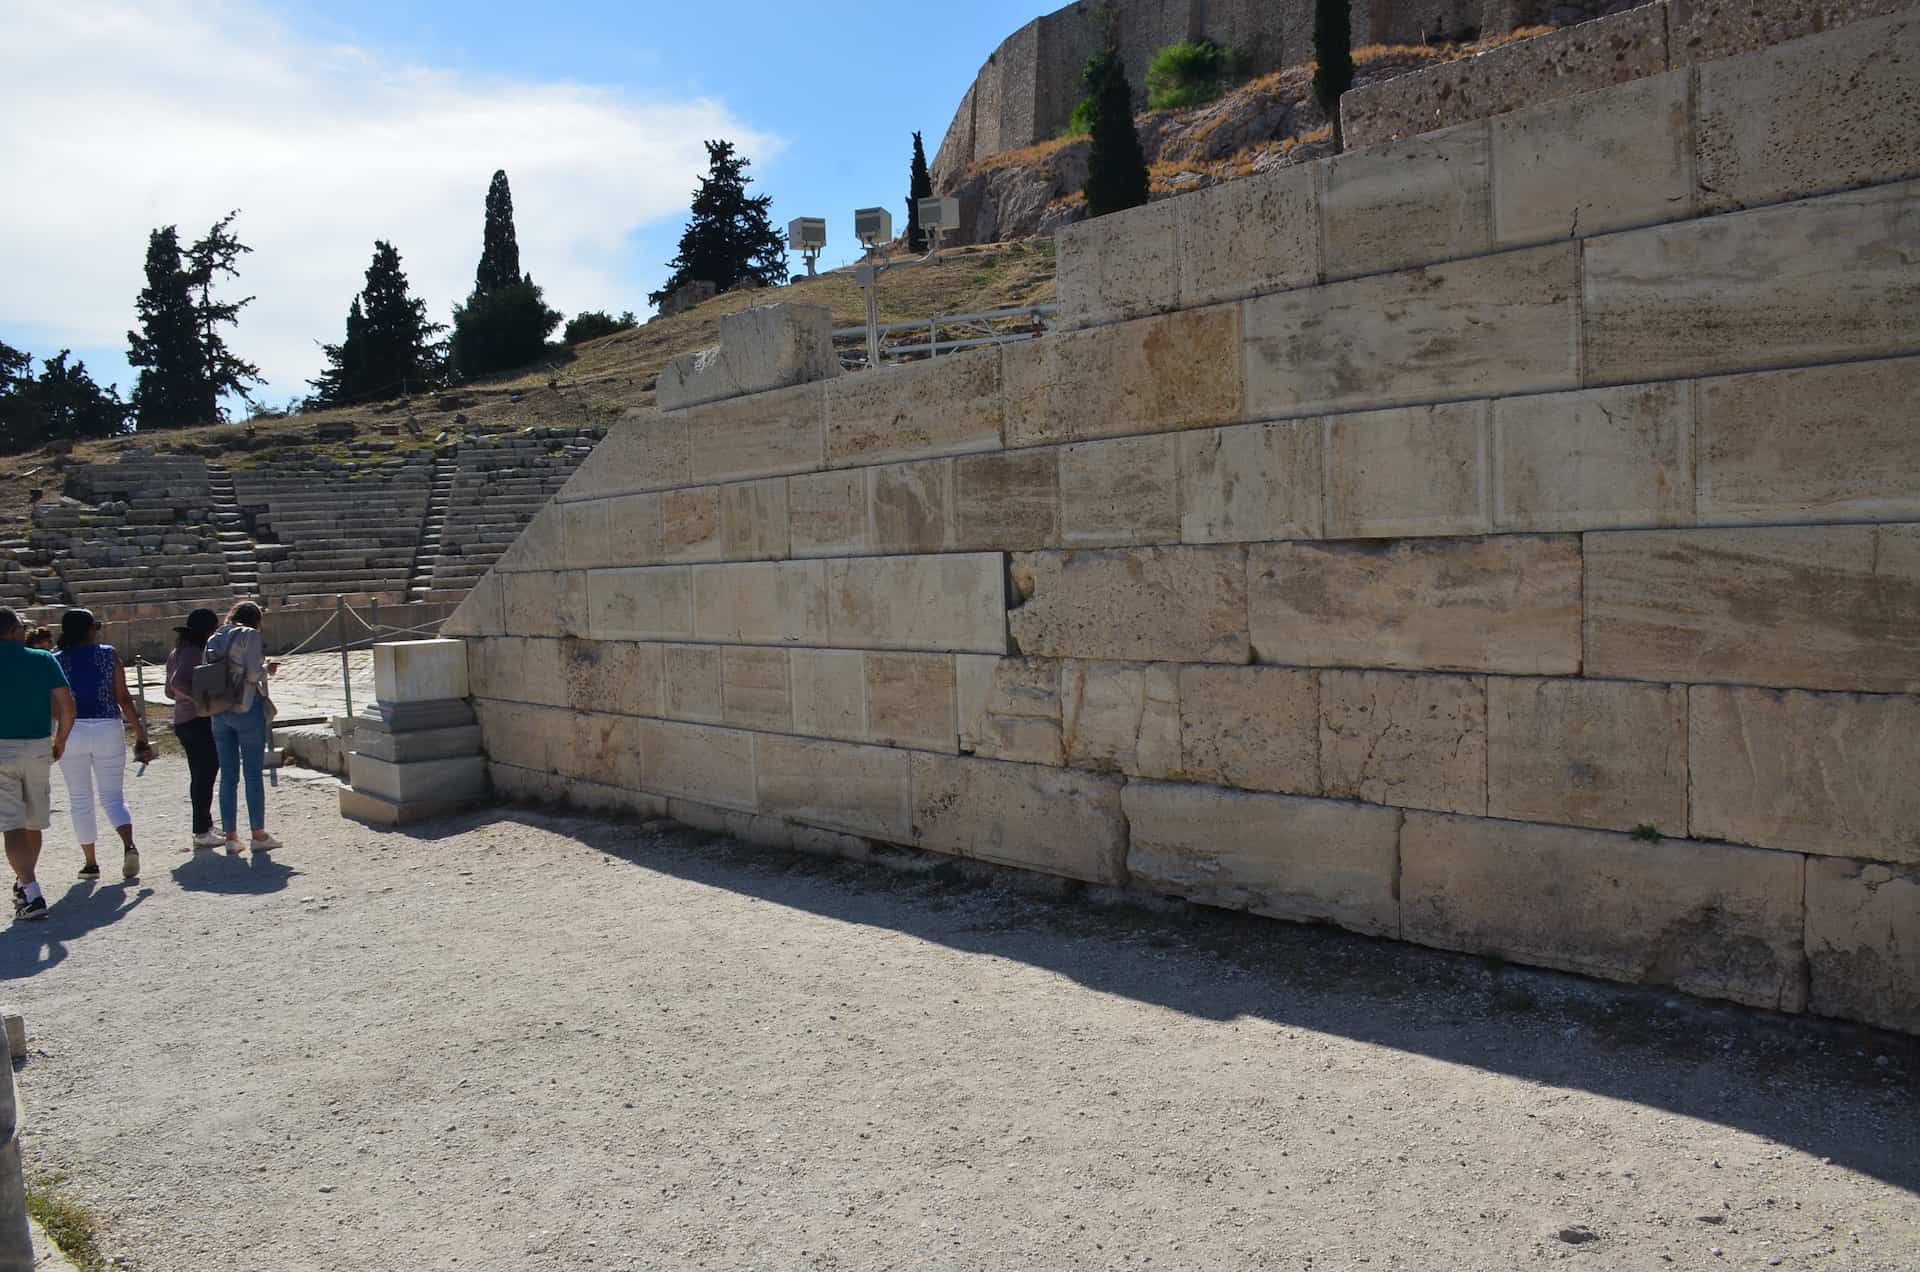 Retaining wall of the east parados of the Theatre of Dionysus on the south slope of the Acropolis in Athens, Greece